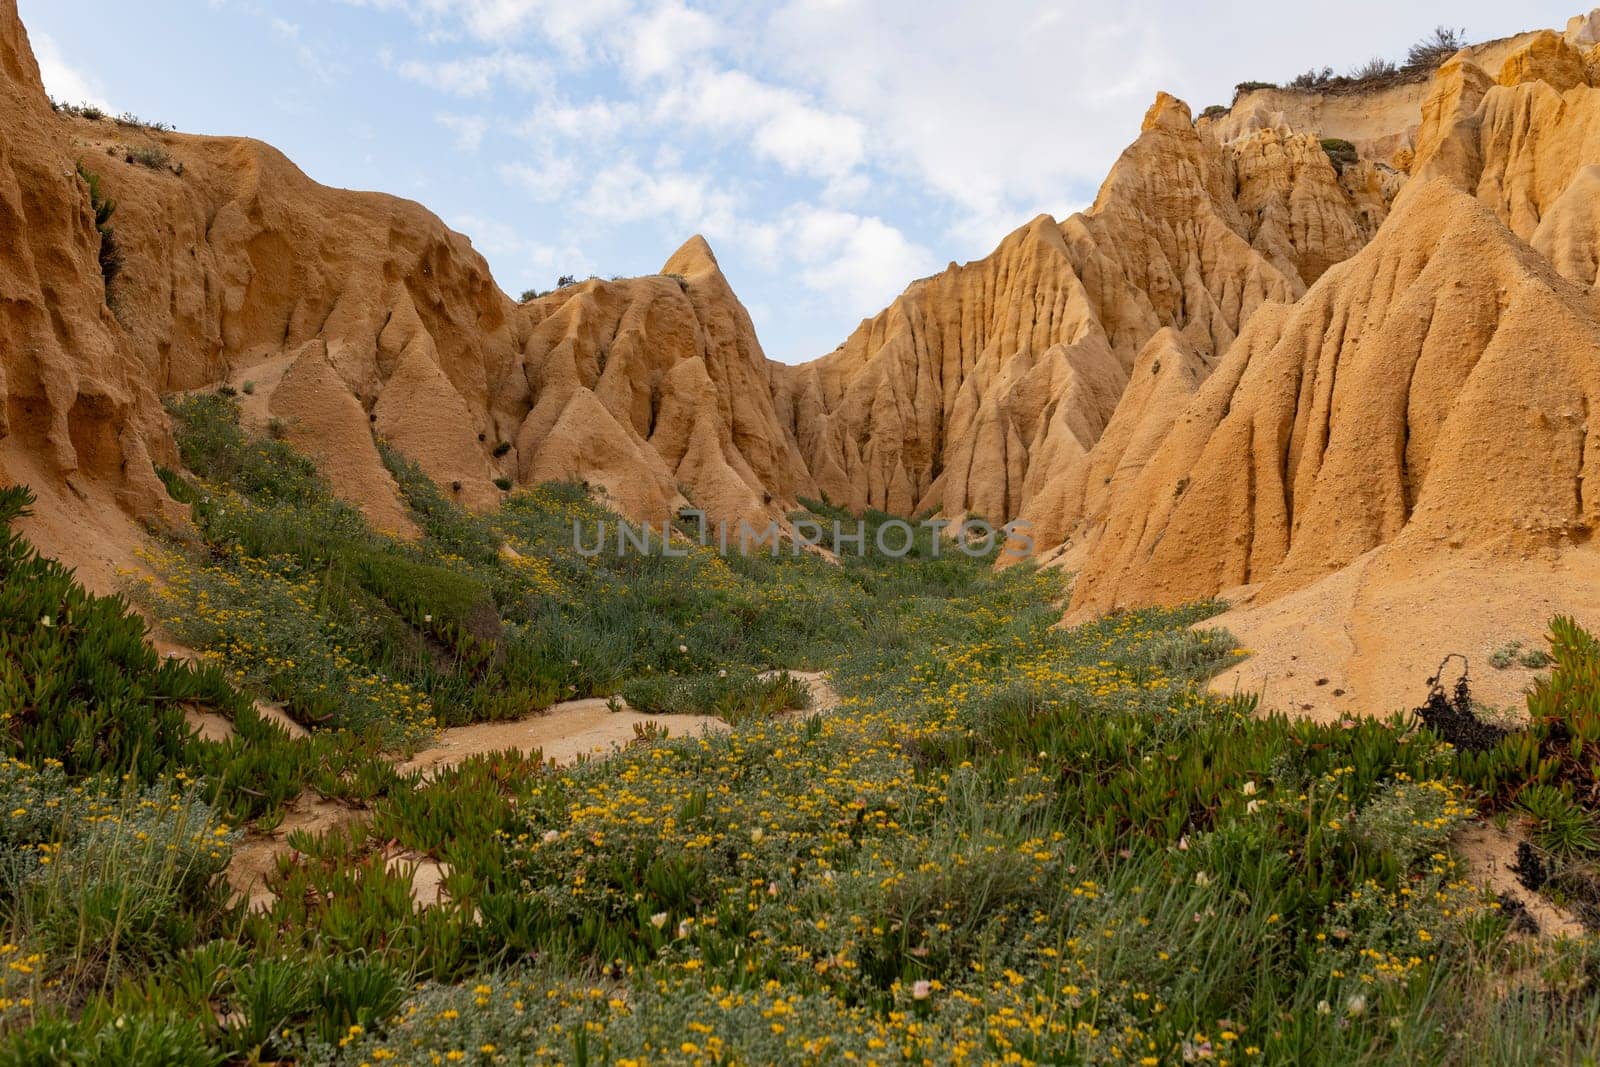 A rocky, barren landscape with a few patches of green grass and yellow flowers by Studia72